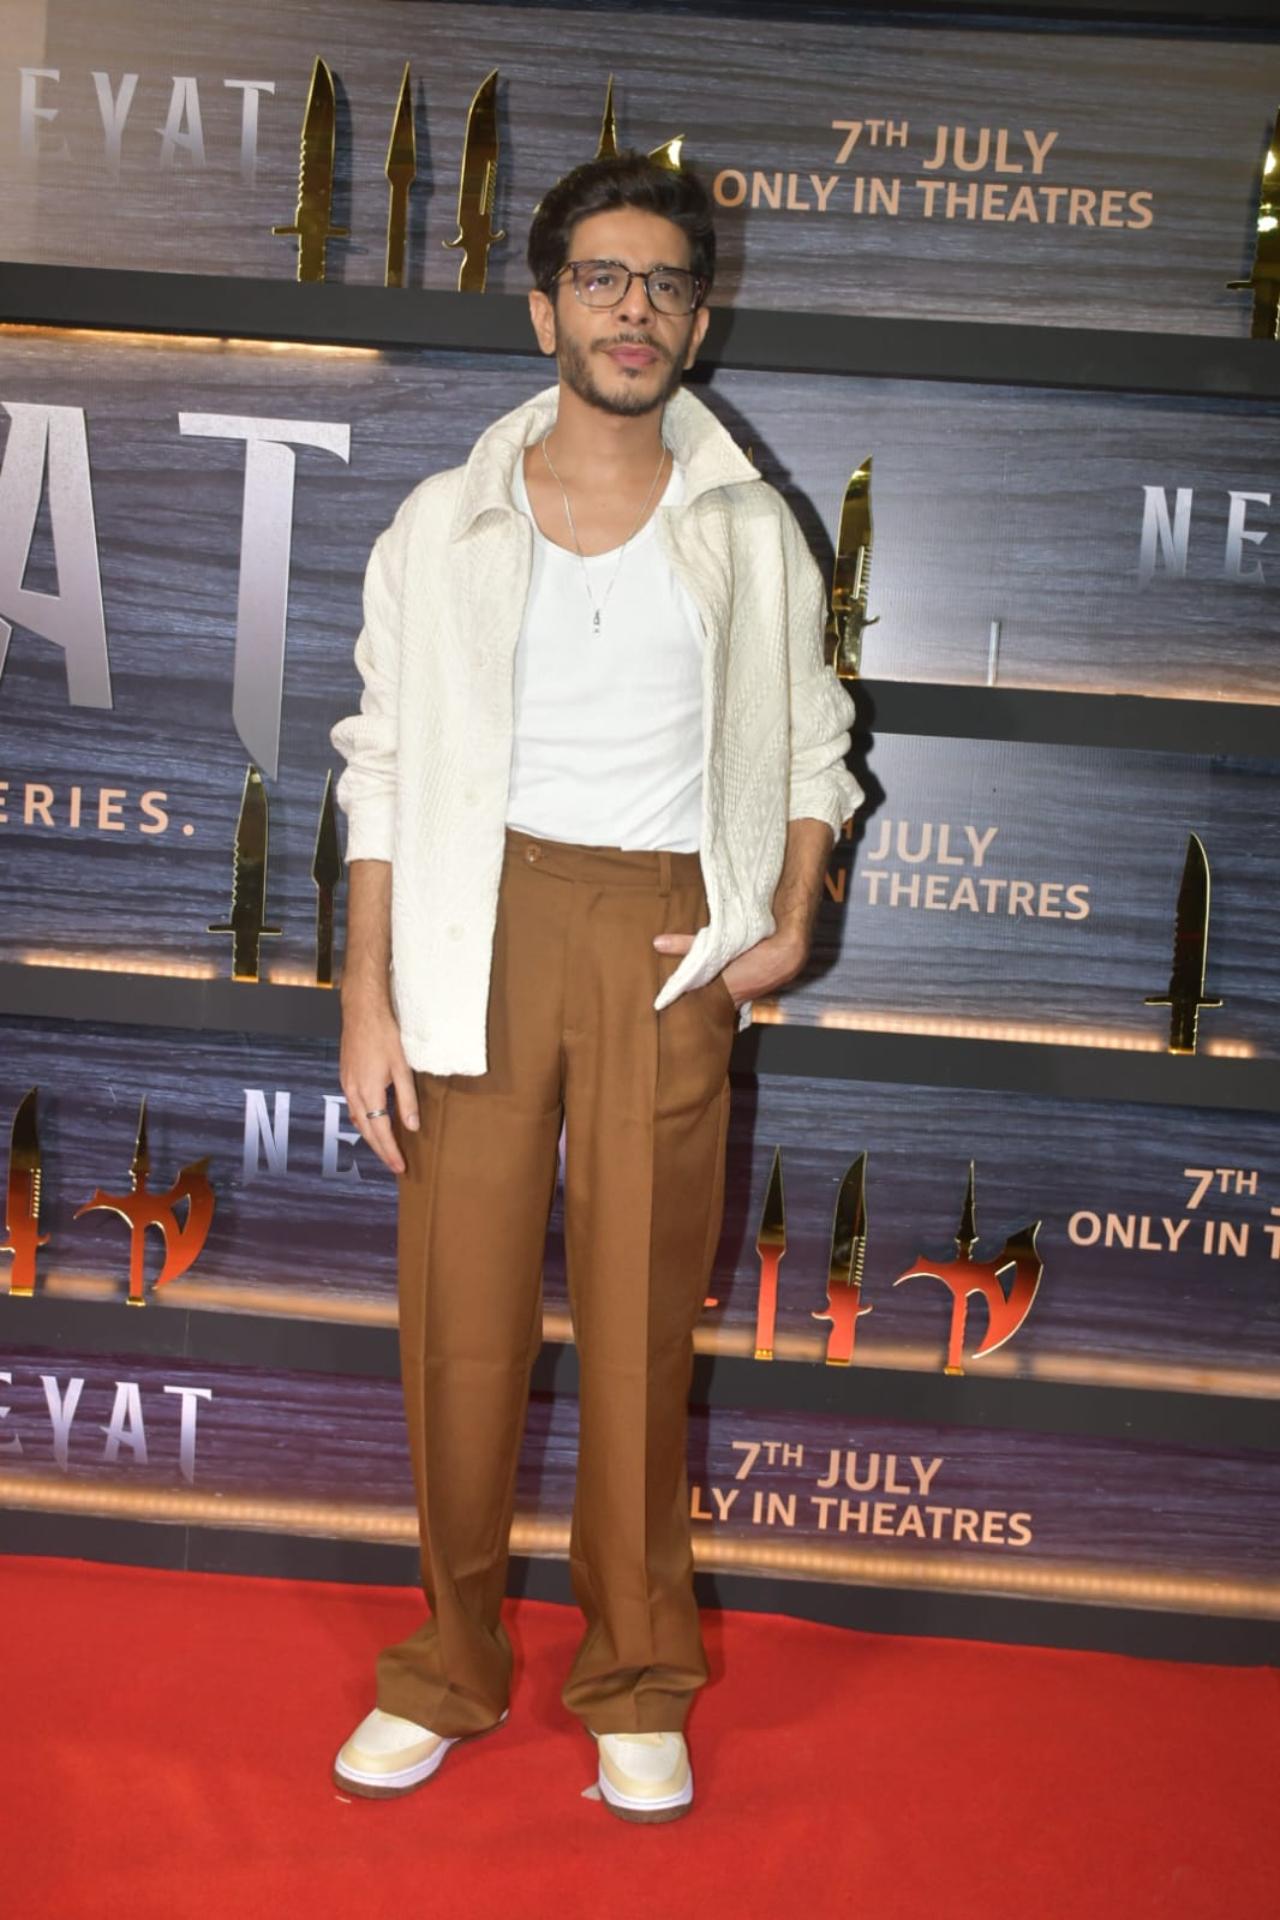 Shashank Arora essays the role of Ryan Kapoor in 'Neeyat'. He looked cool in a white-on-white t-shirt and jacket paired with baggy brown bottoms